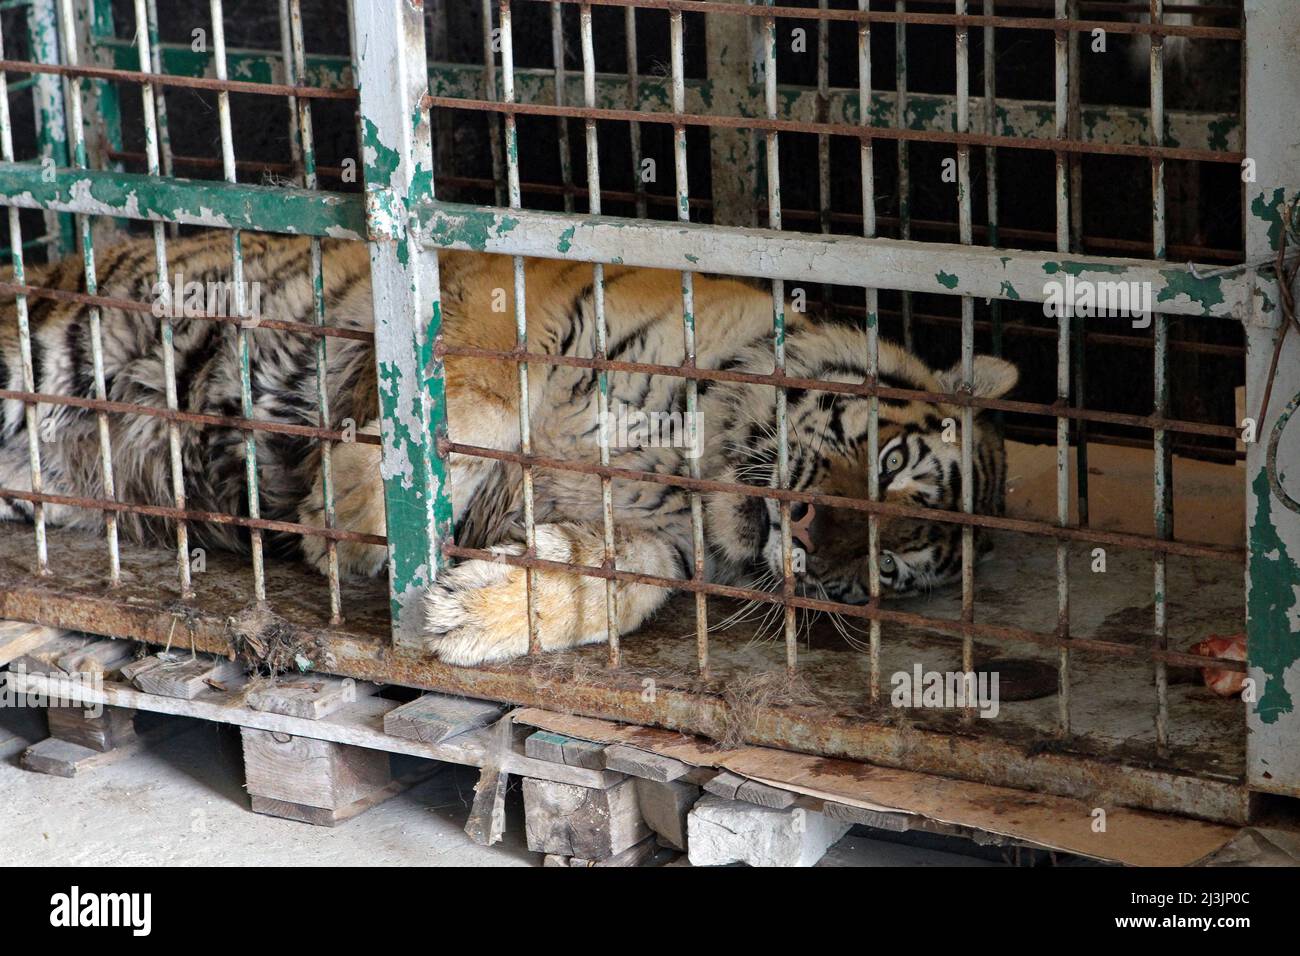 DNIPRO, UKRAINE - APRIL 8, 2022 - A tiger stays in a cage after its evacuation from the ruined Kharkiv Feldman Ecopark, Dnipro, central Ukraine. Stock Photo